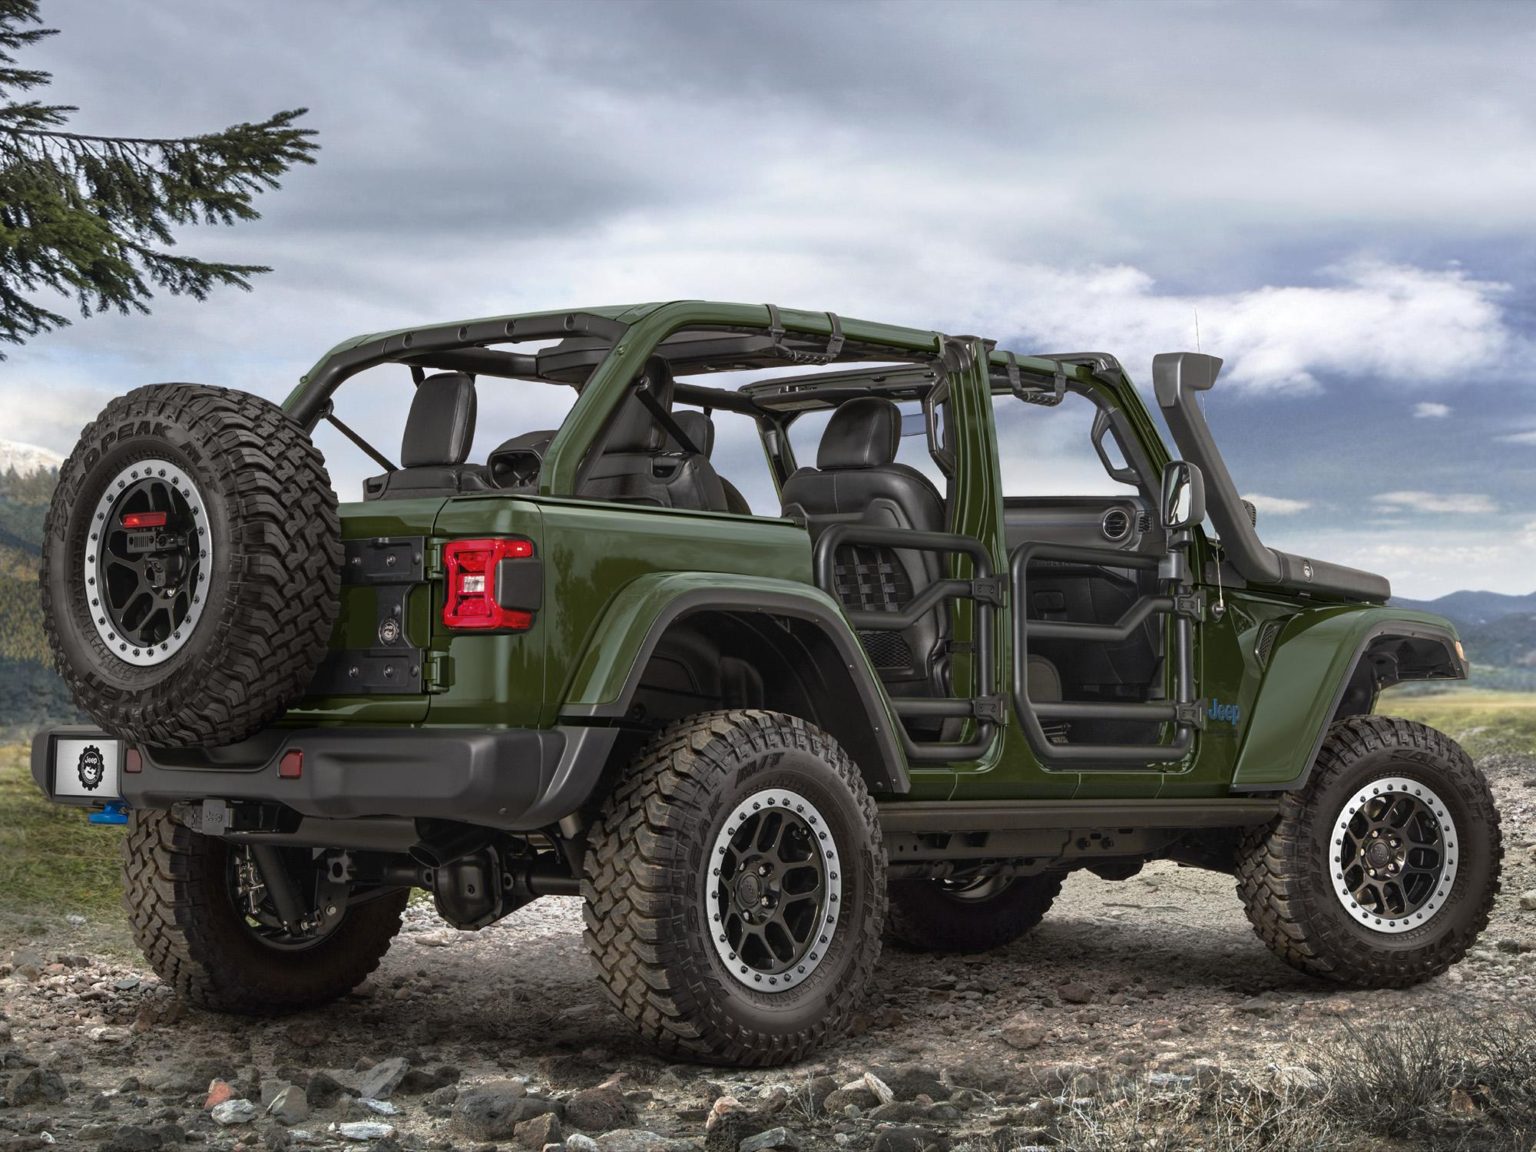 Mopar has introduced unique accessories for the new Jeep Wrangler 4xe.